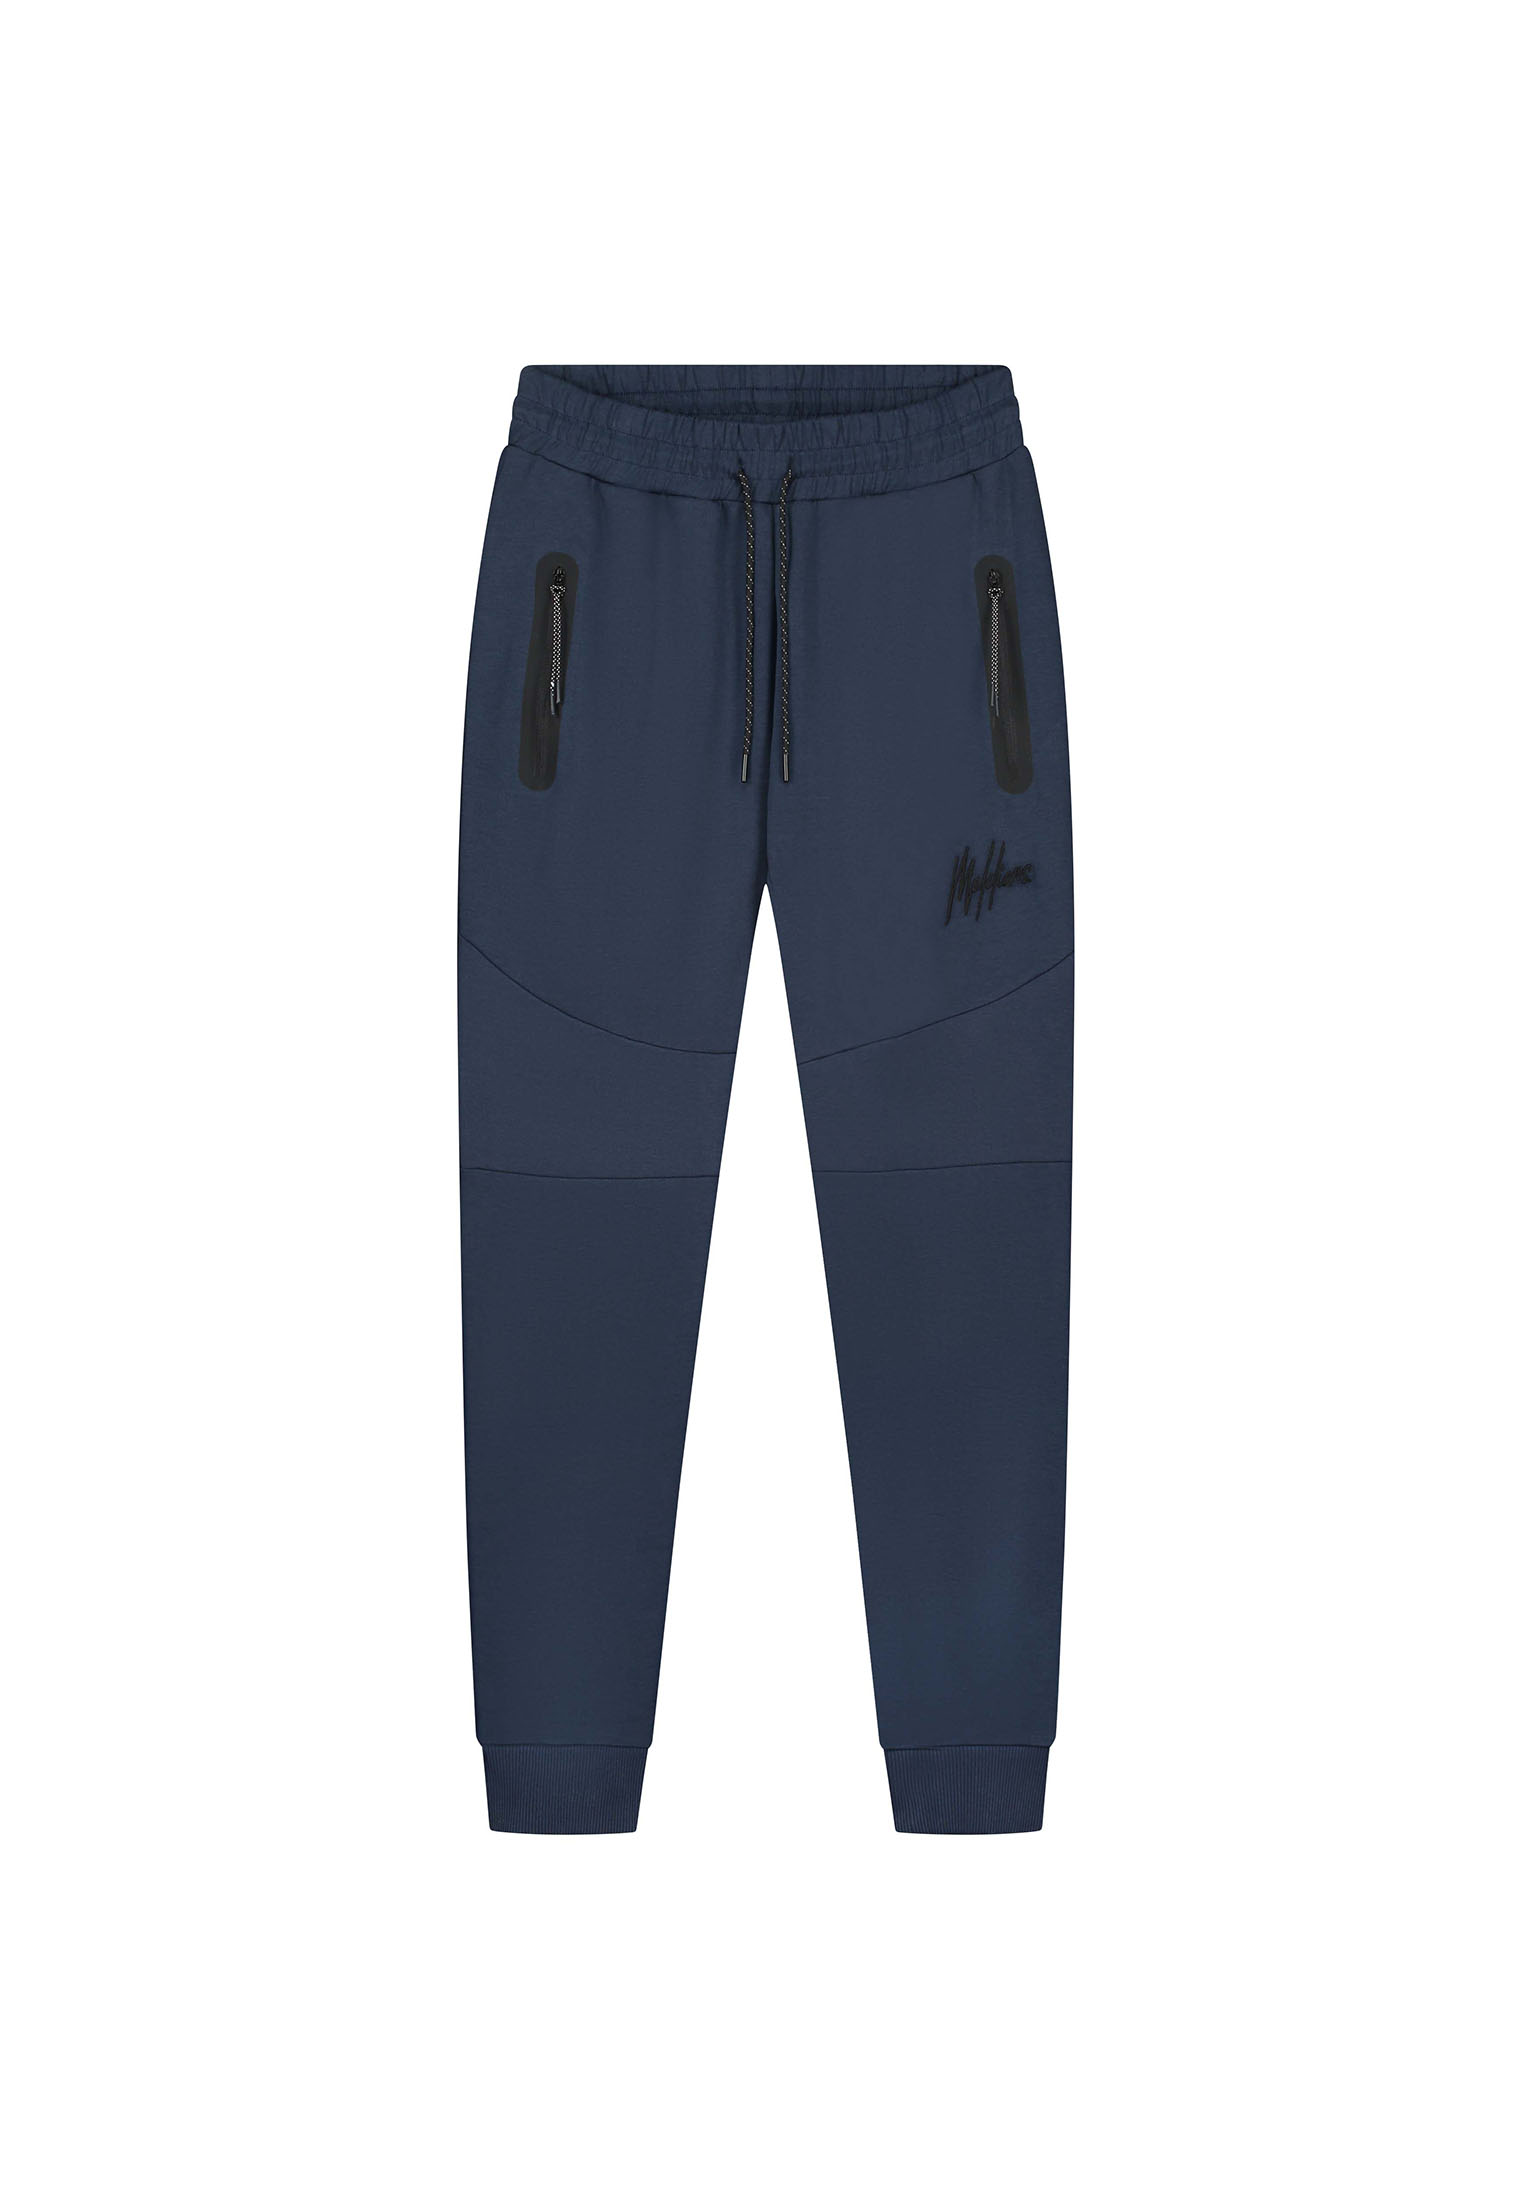 Malelions Sport Counter Trackpants MS2-AW23-09-011 Blauw -XL maat XL